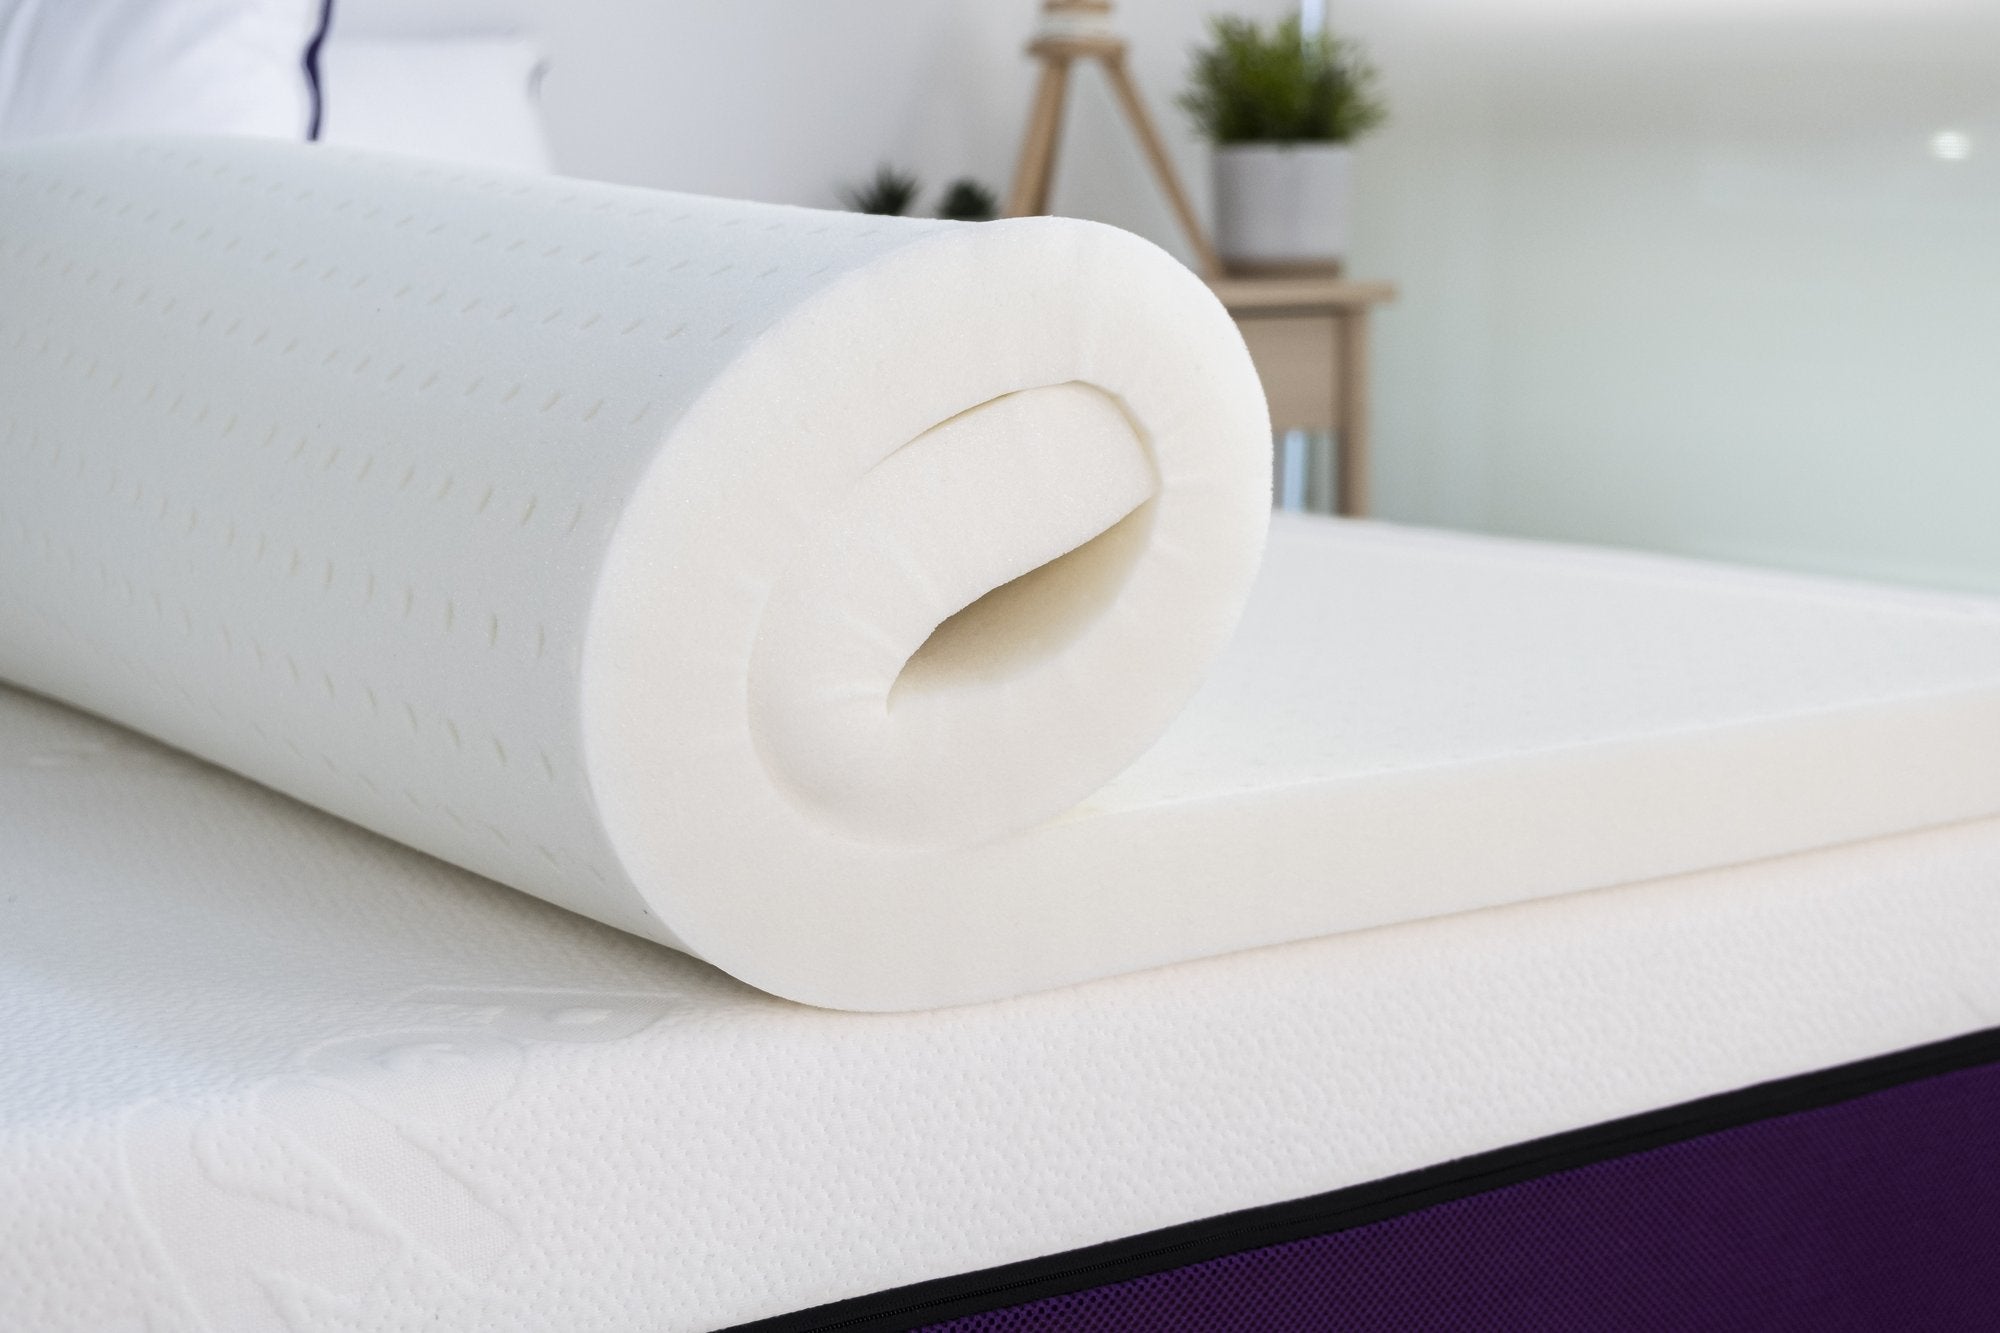 Polysleep antimicrobial mattress topper being rolled out on top of a mattress